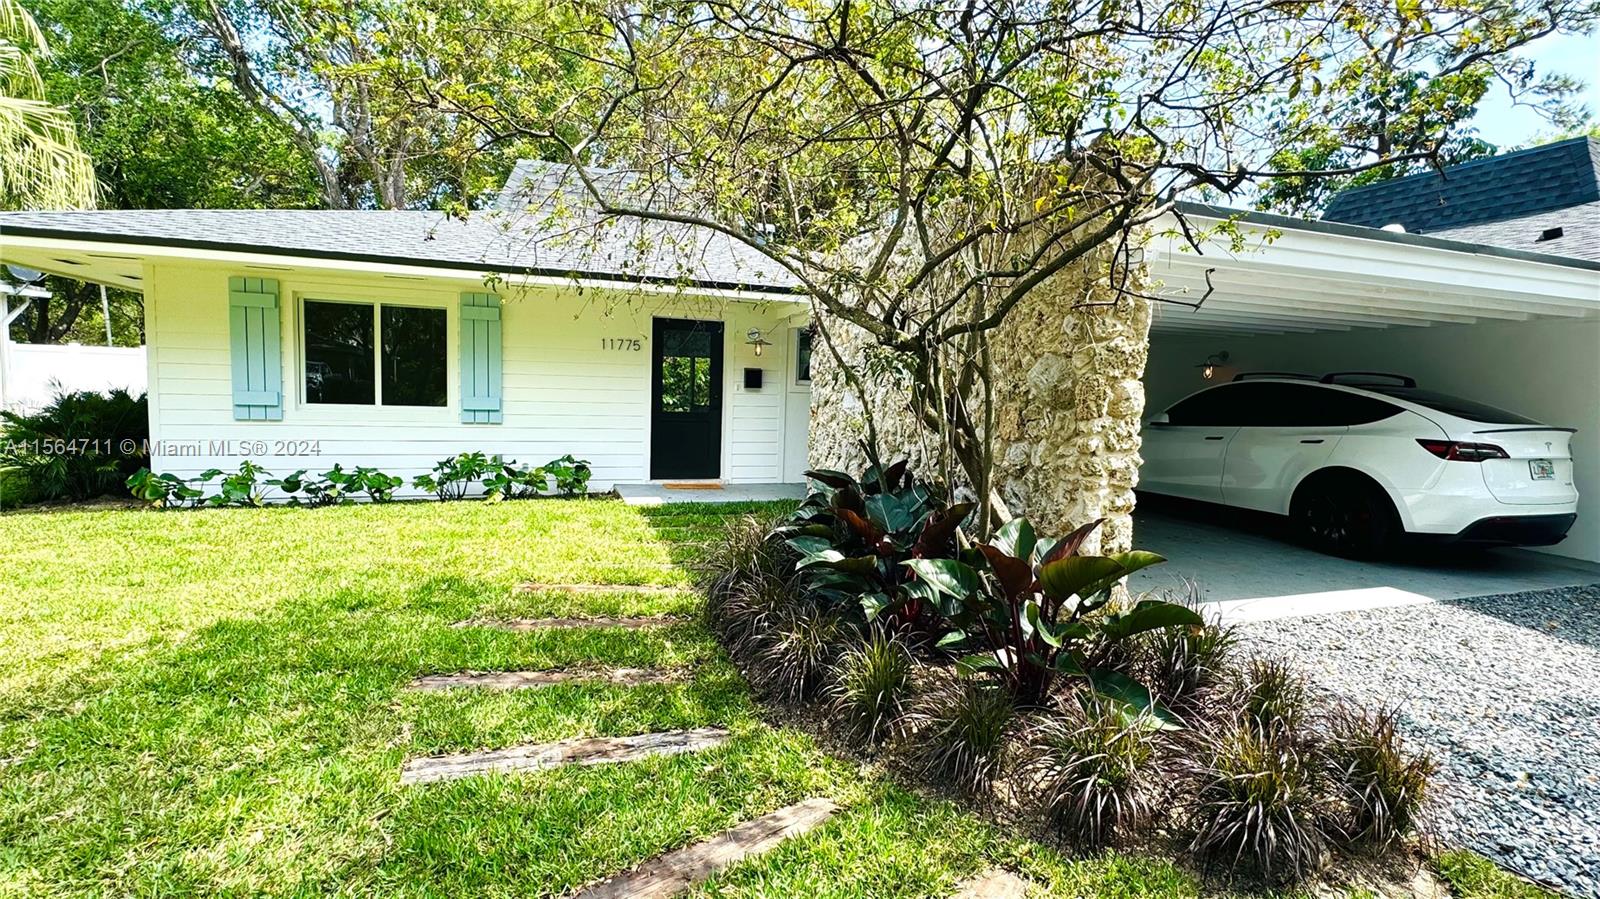 Brand new DUPLEX in Pinecrest.  Two homes in one property.  Live on one side with family member next door. This 3/3 and 3/2 property has been fully renovated with designer finishes. Great property in one of Miami's prime locations with a private landscaped yard, inside laundry, carport and walking distance to shops, restaurants and top Pinecrest public schools.  Living Area: 2,380  Adjusted Area: 2,583